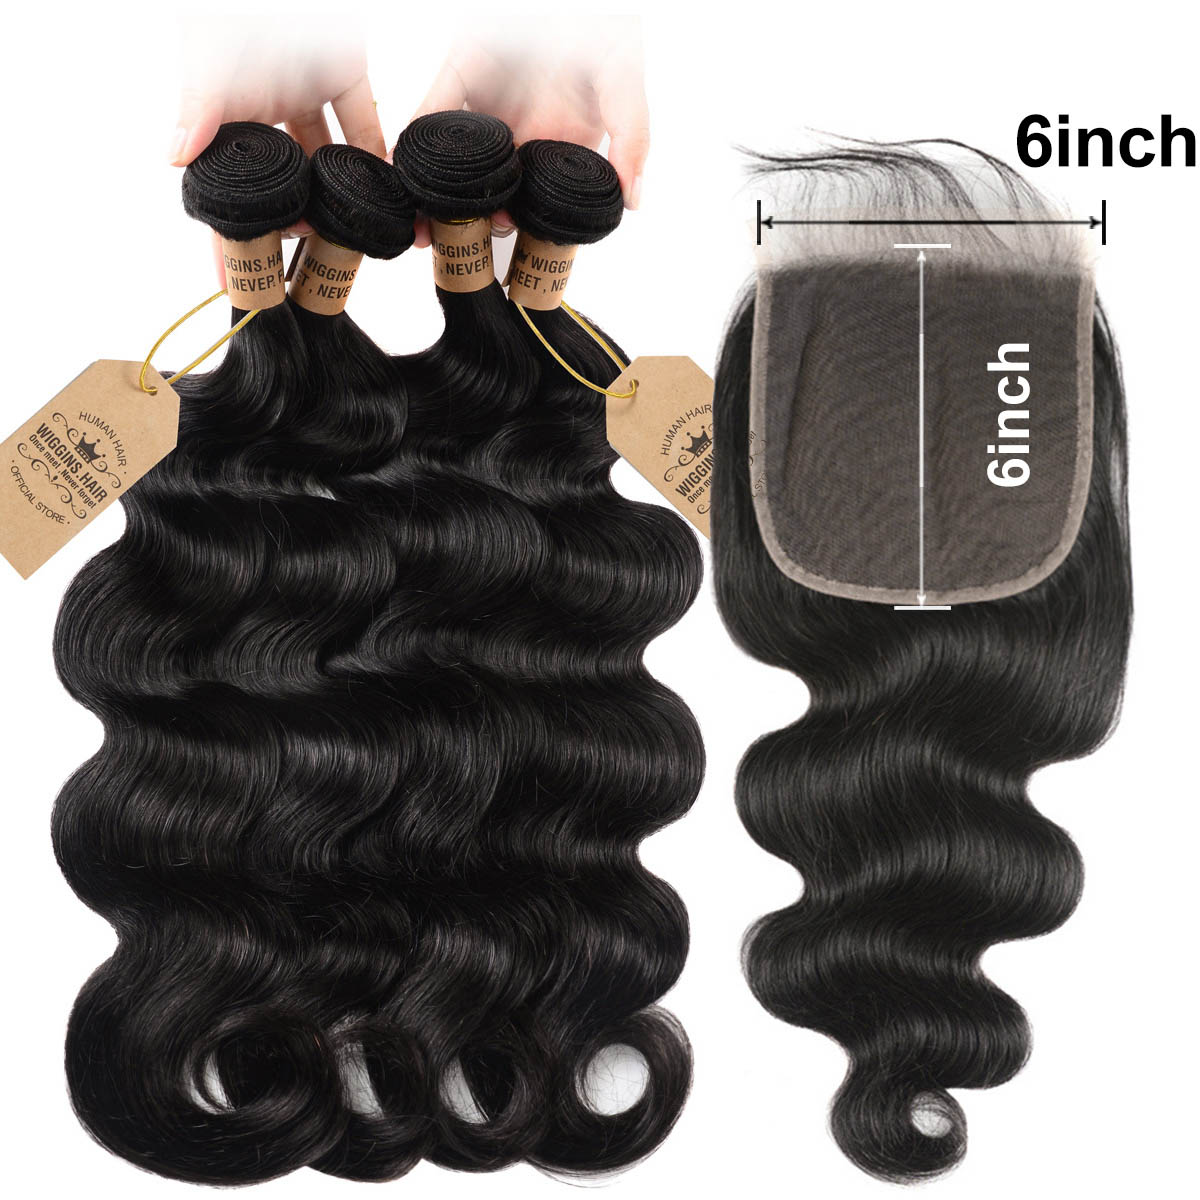 body wave 4 bundles with closure